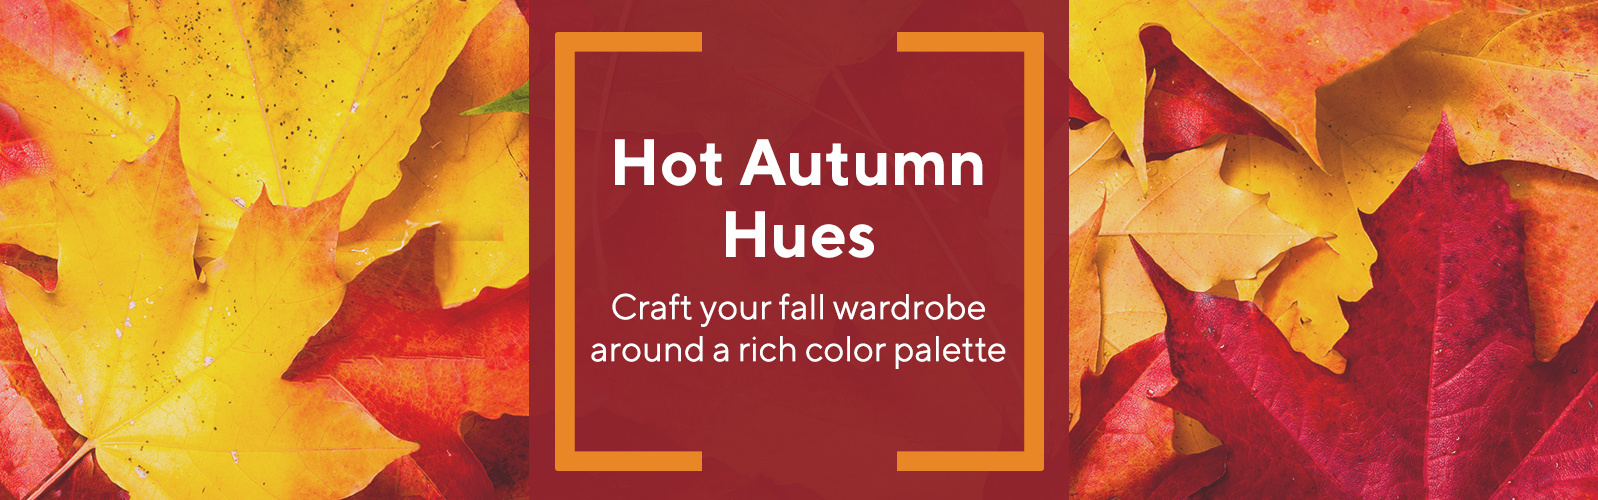 Hot Autumn Hues   Craft your fall wardrobe around a rich color palette 